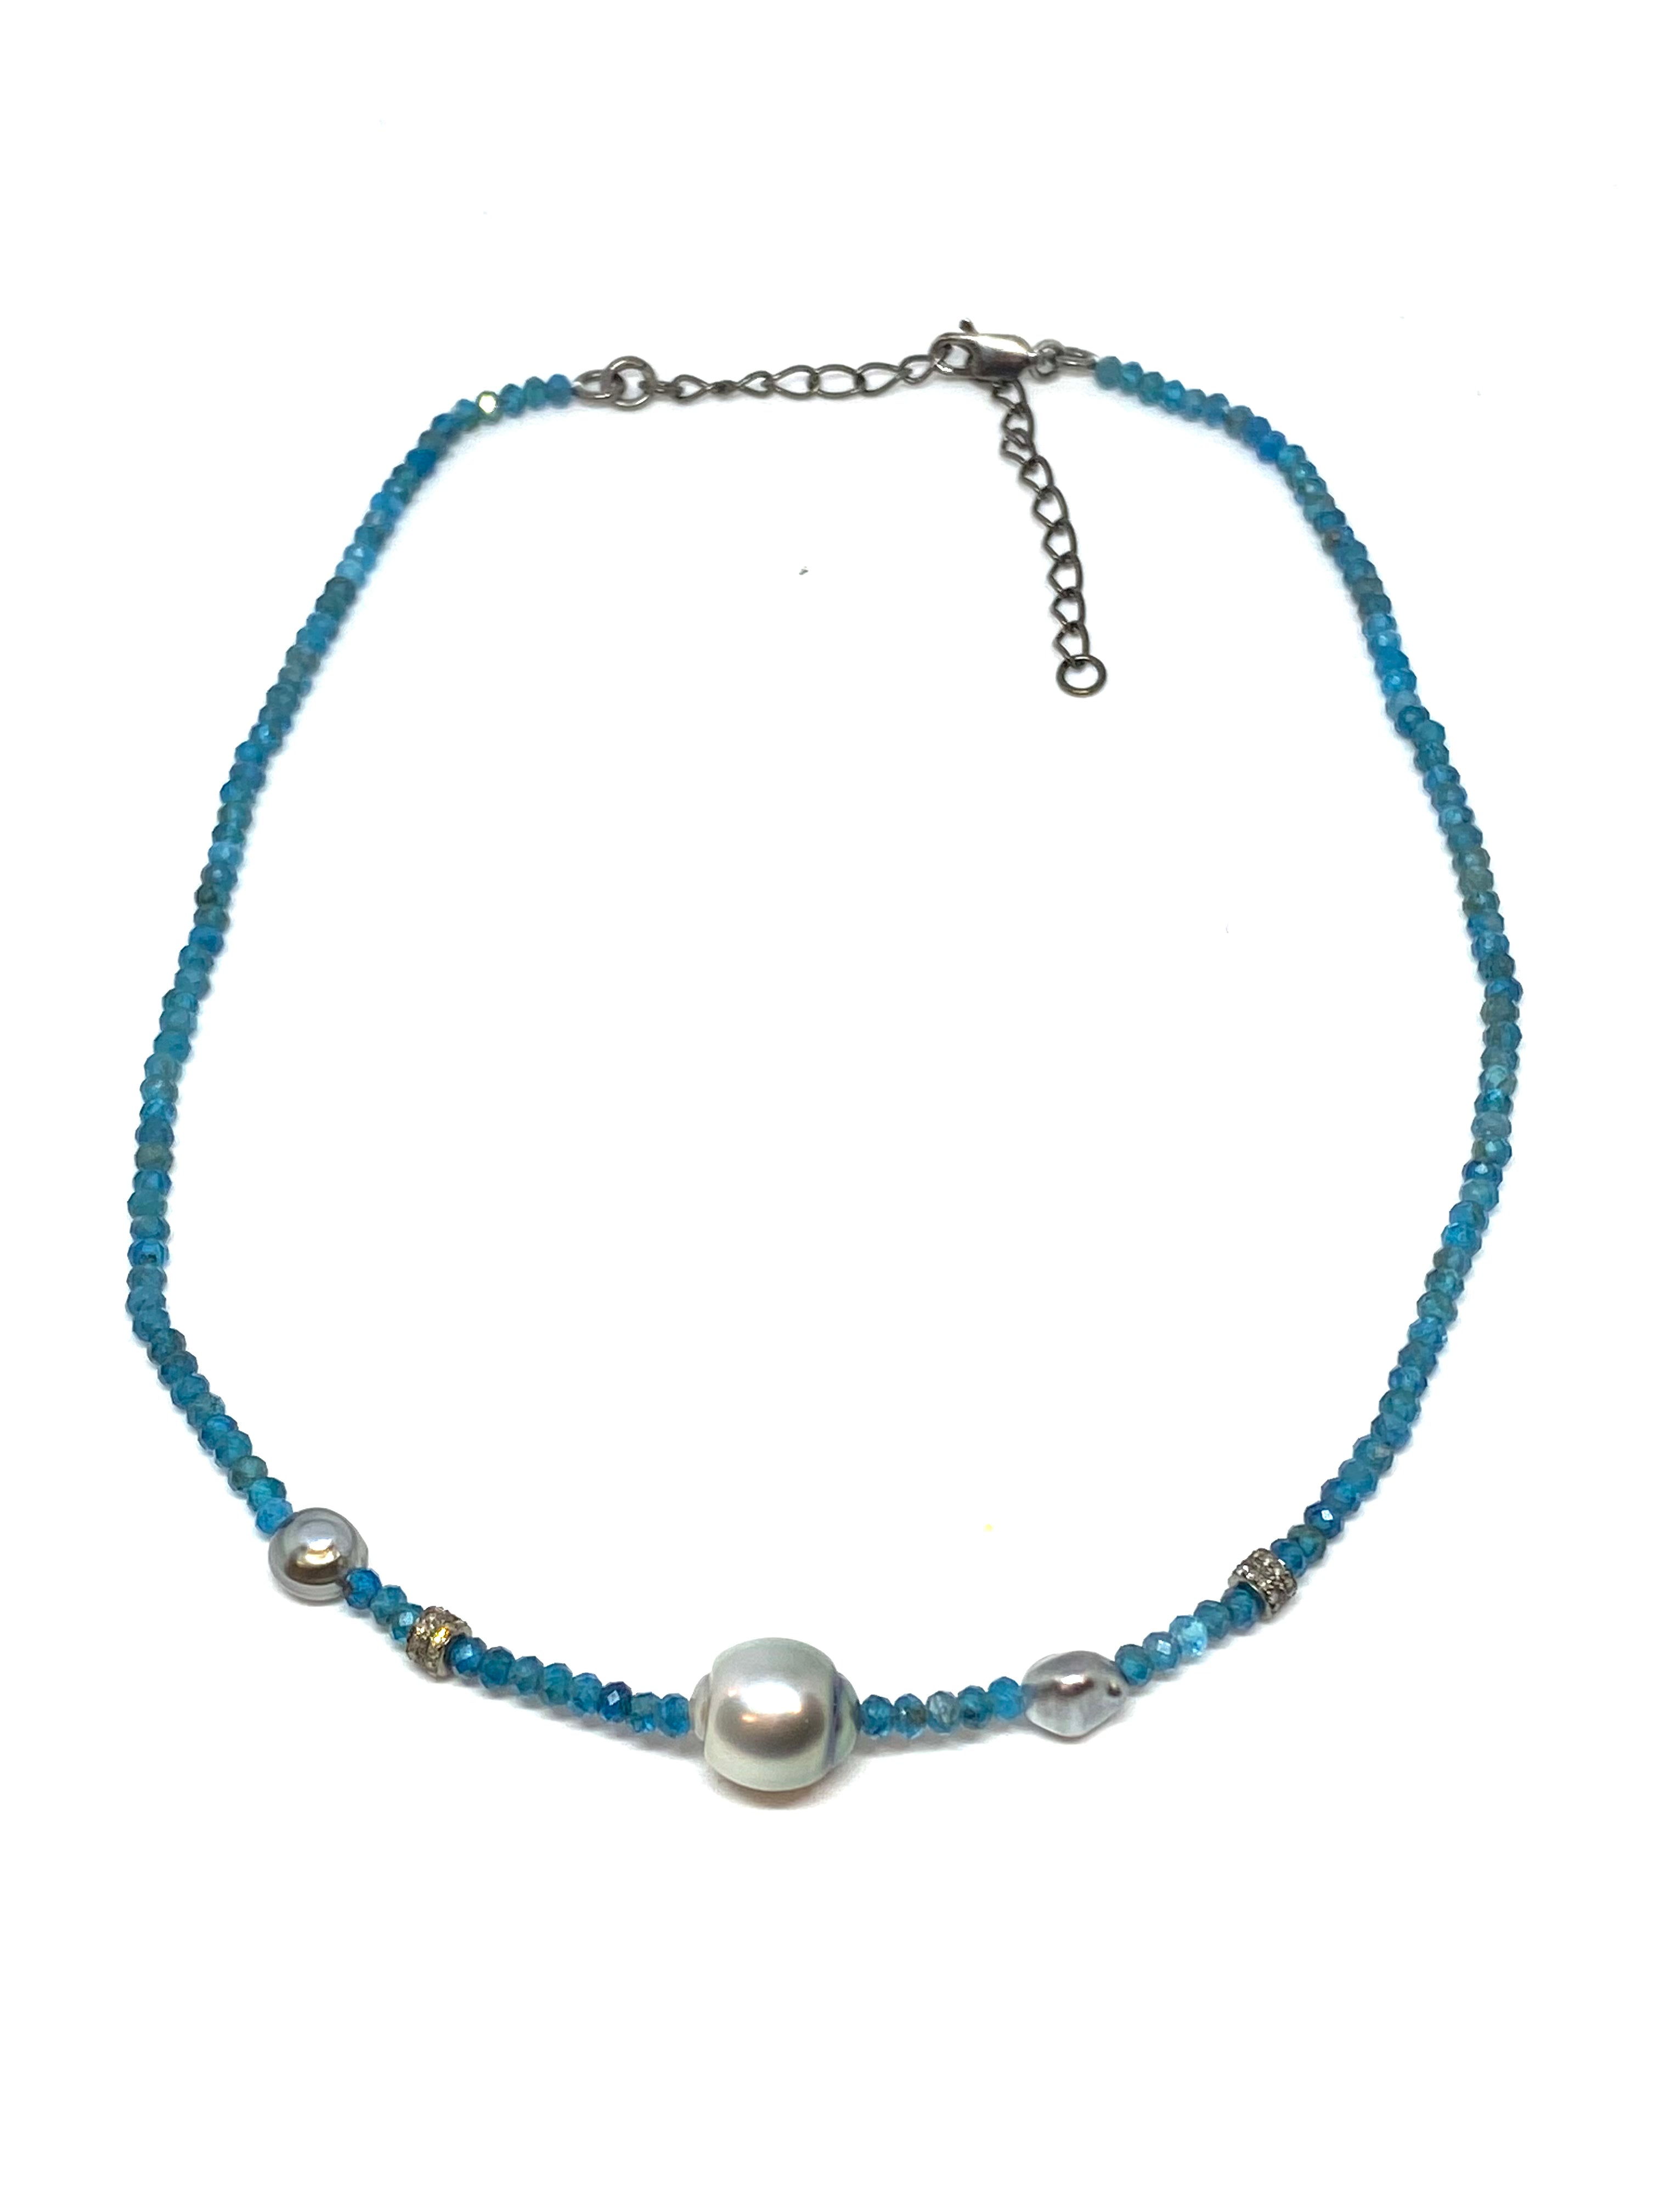 Nathan and moe 3mm apatite bead necklace with Tahitian pearls and oxidized diamond rondells